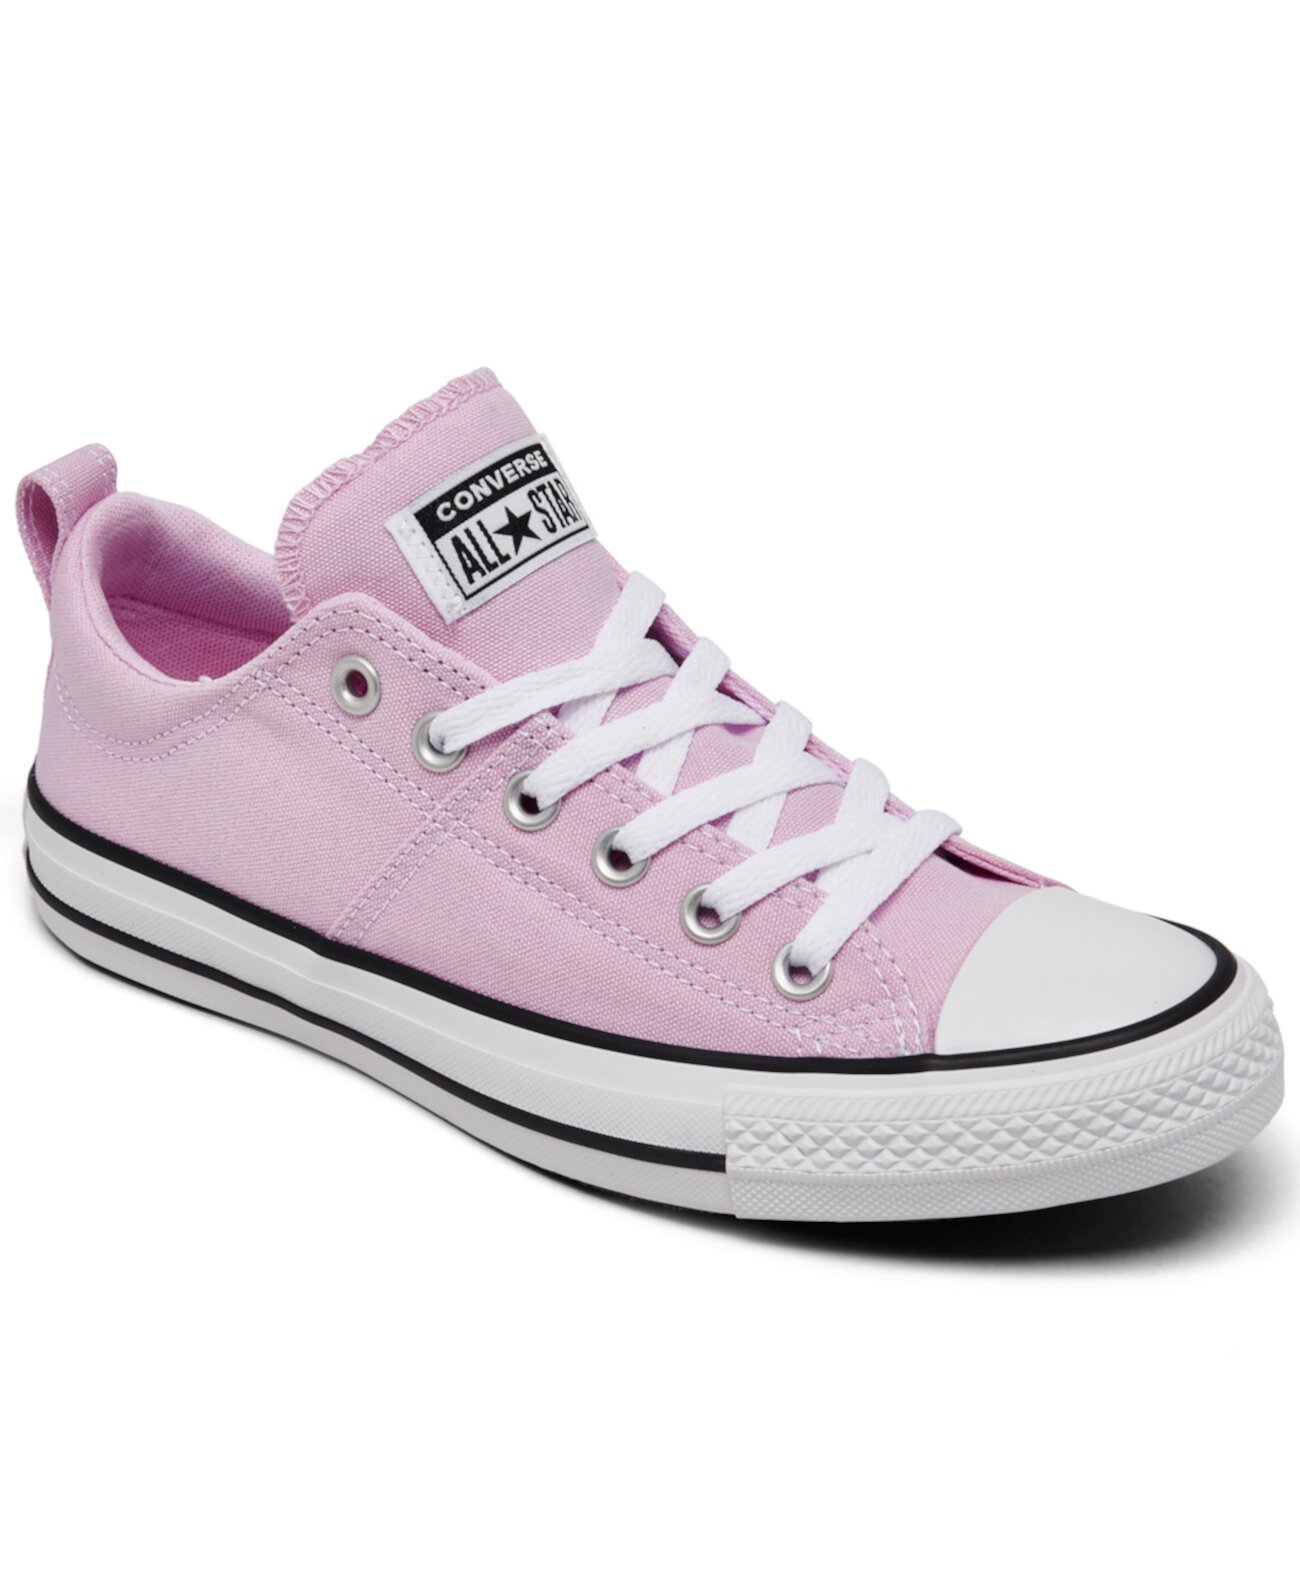 Women’s Chuck Taylor Madison Low Top Casual Sneakers from Finish Line Converse